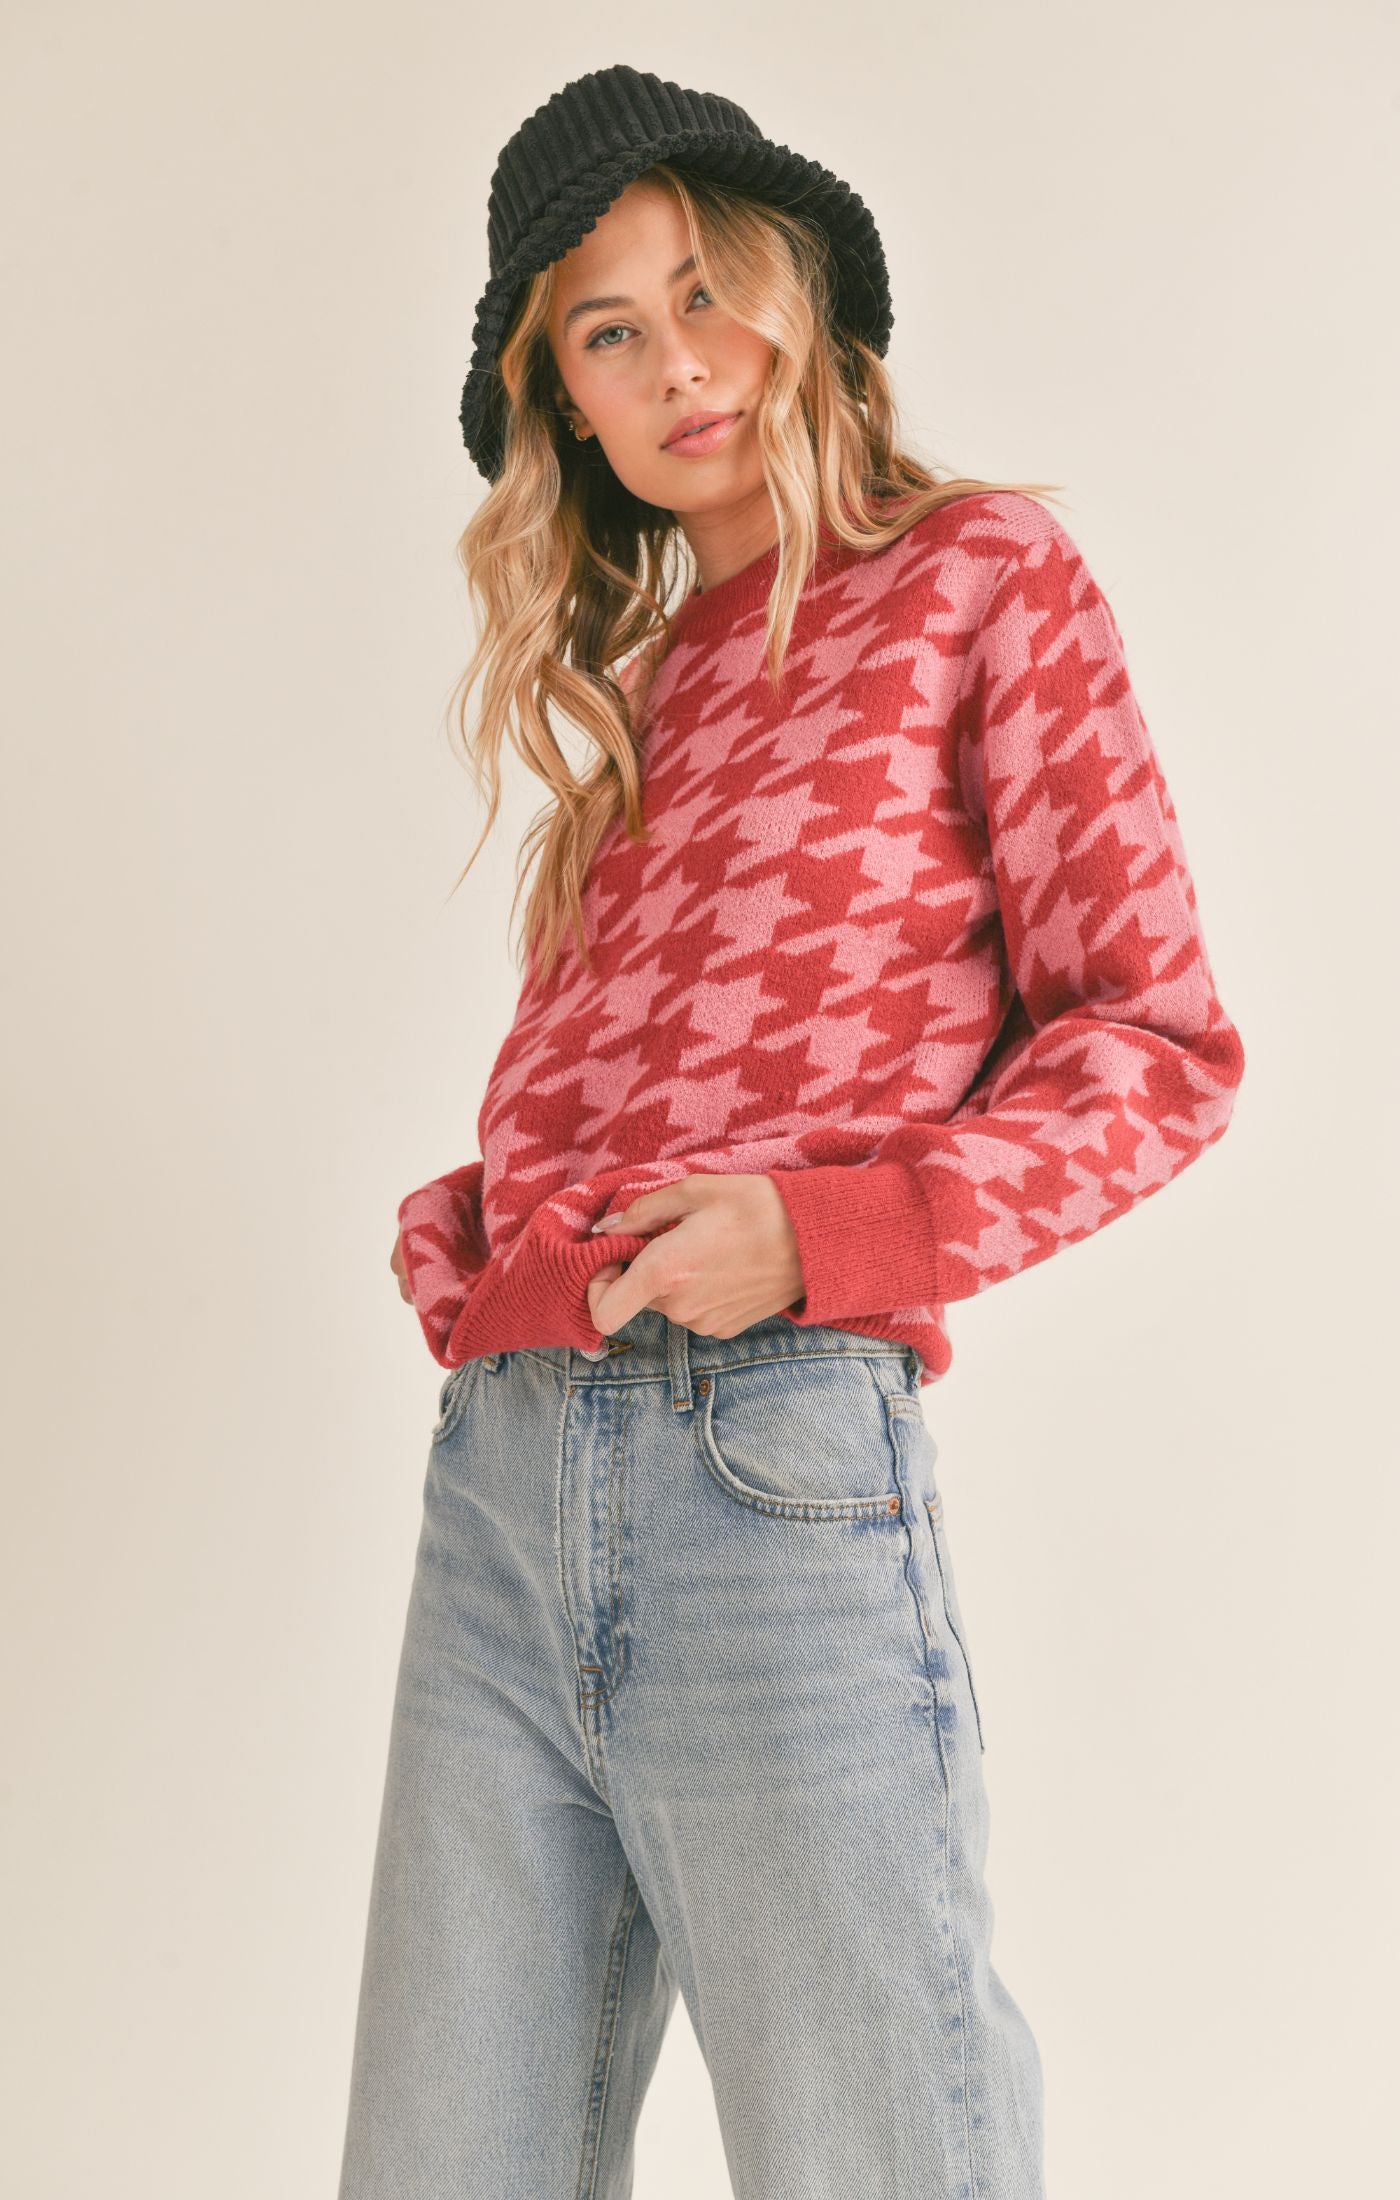 SENNA HOUNDSTOOTH SWEATER-pink red,houndstooth pattern,long sleeves,round neck